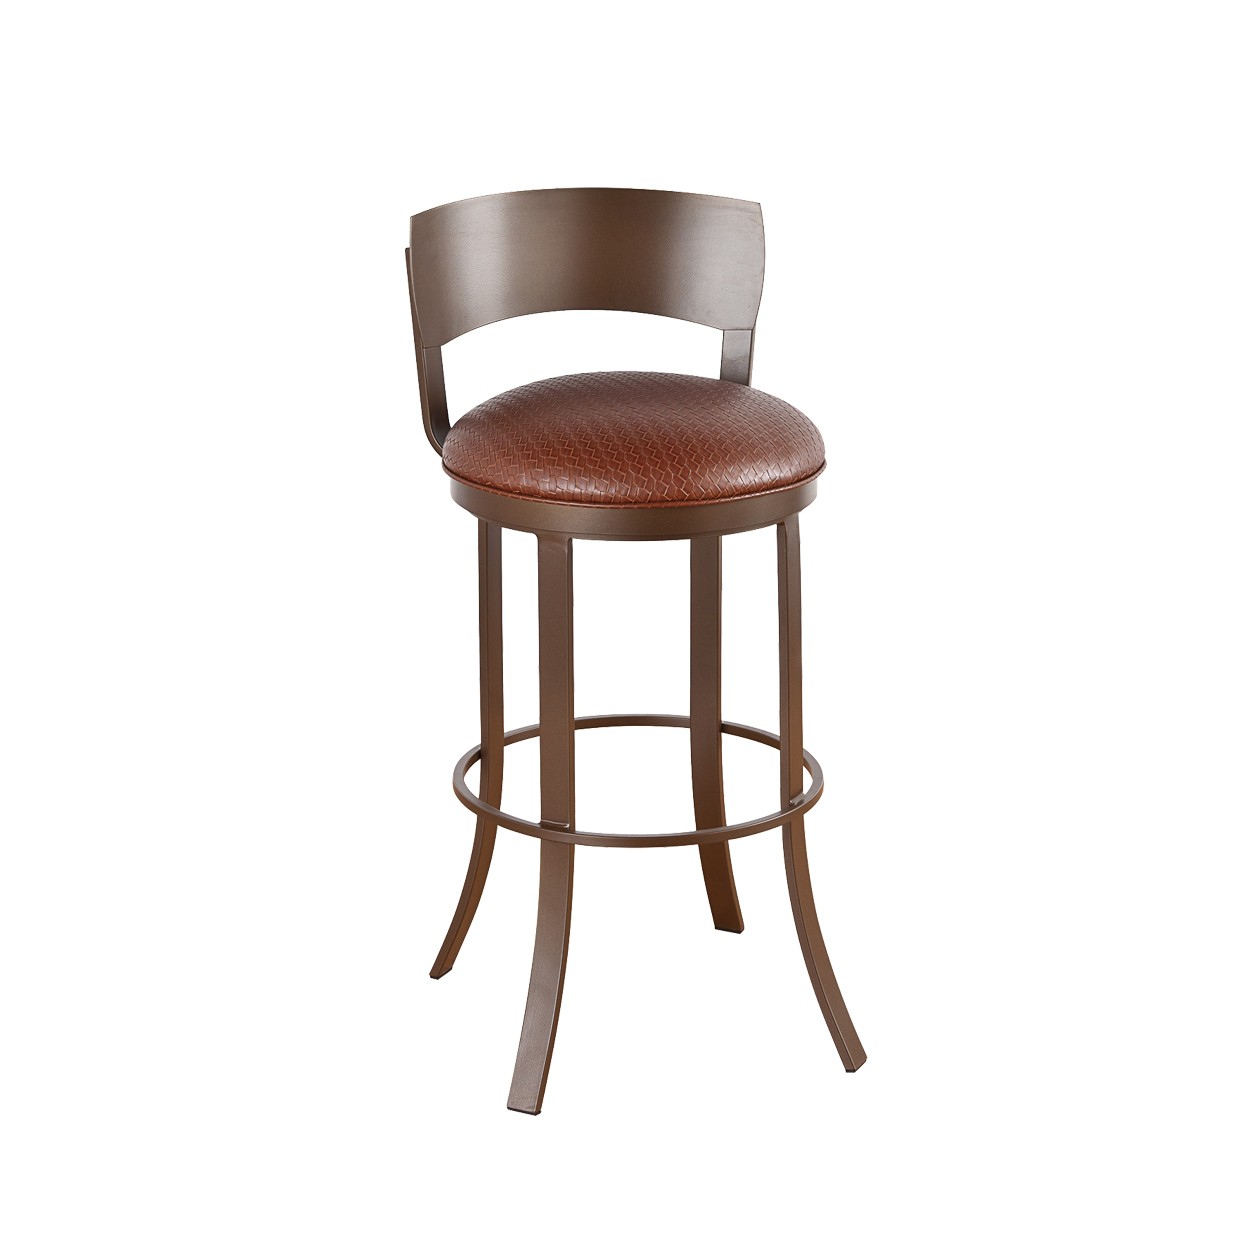 Callee Bailey Bar Stool Barstool Designs, What Height Stool For 34 Inch Counter